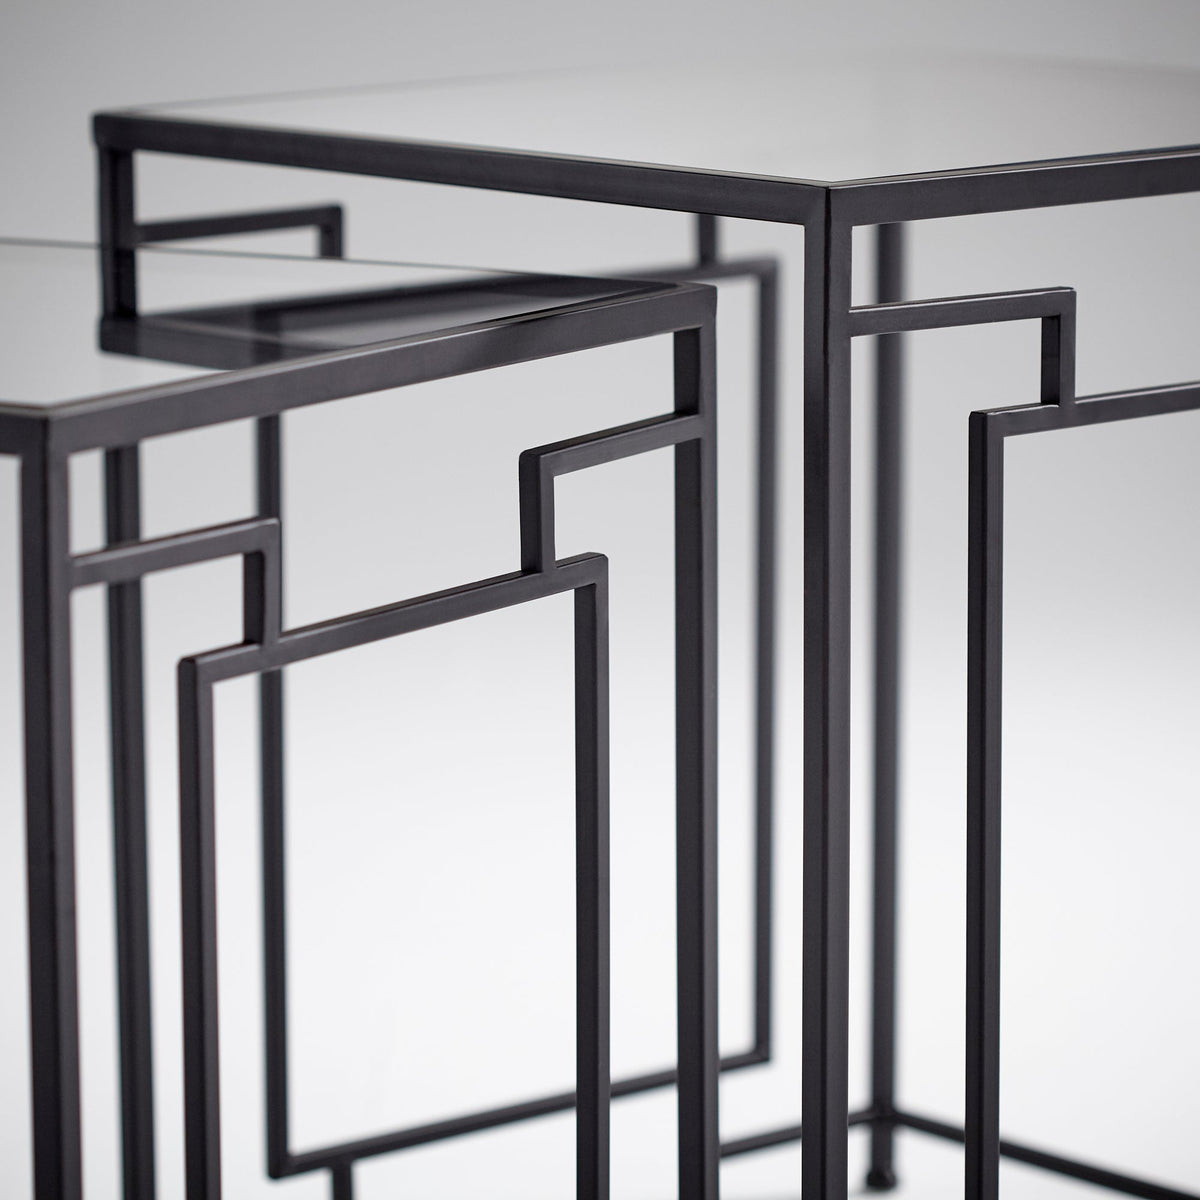 Square Galleria Tables by Cyan